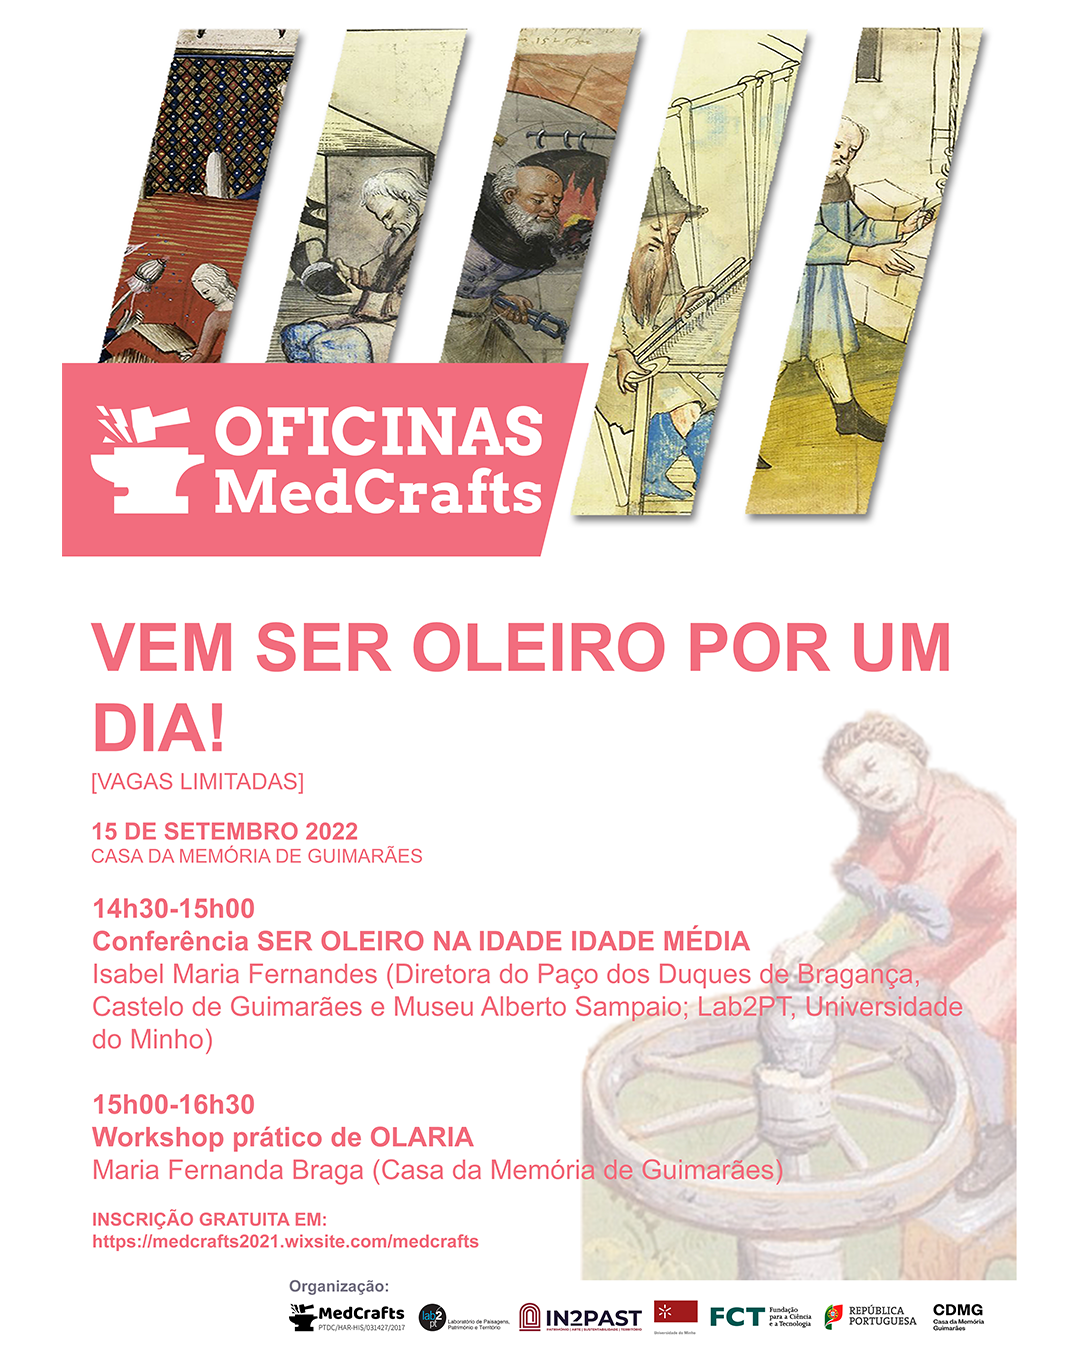 MedCrafts Workshops - cycle of conferences and hands-on workshops: "Being a potter in the Middle Ages" image